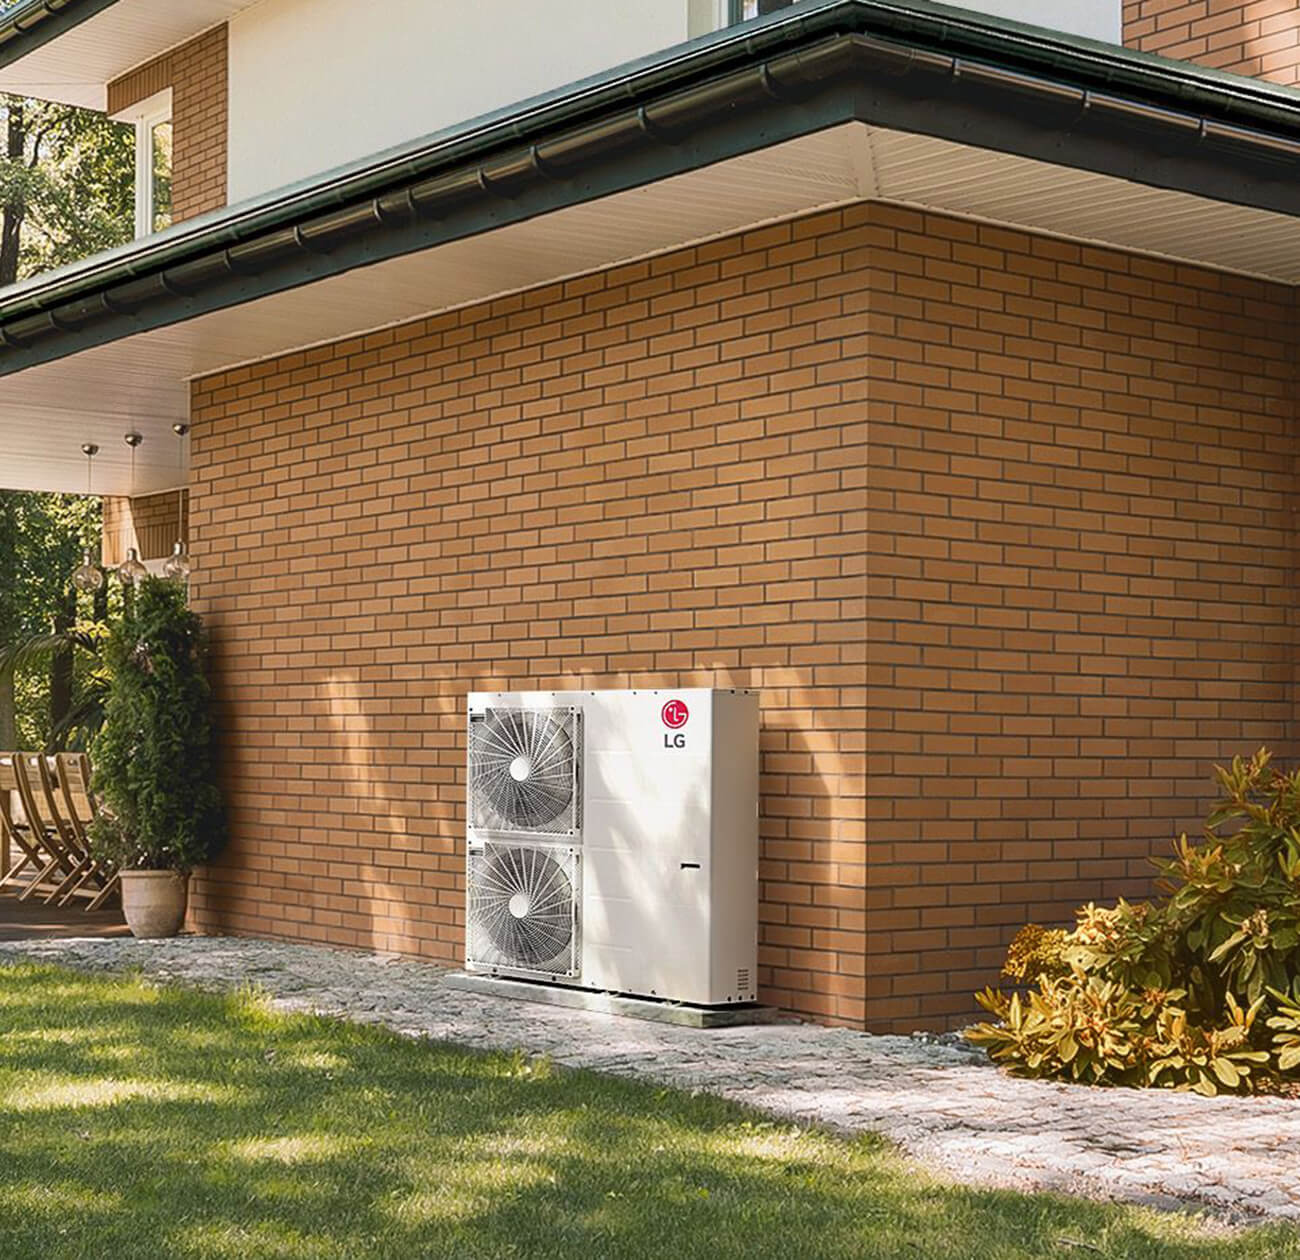 LG's Air-to-Water Heat Pumps